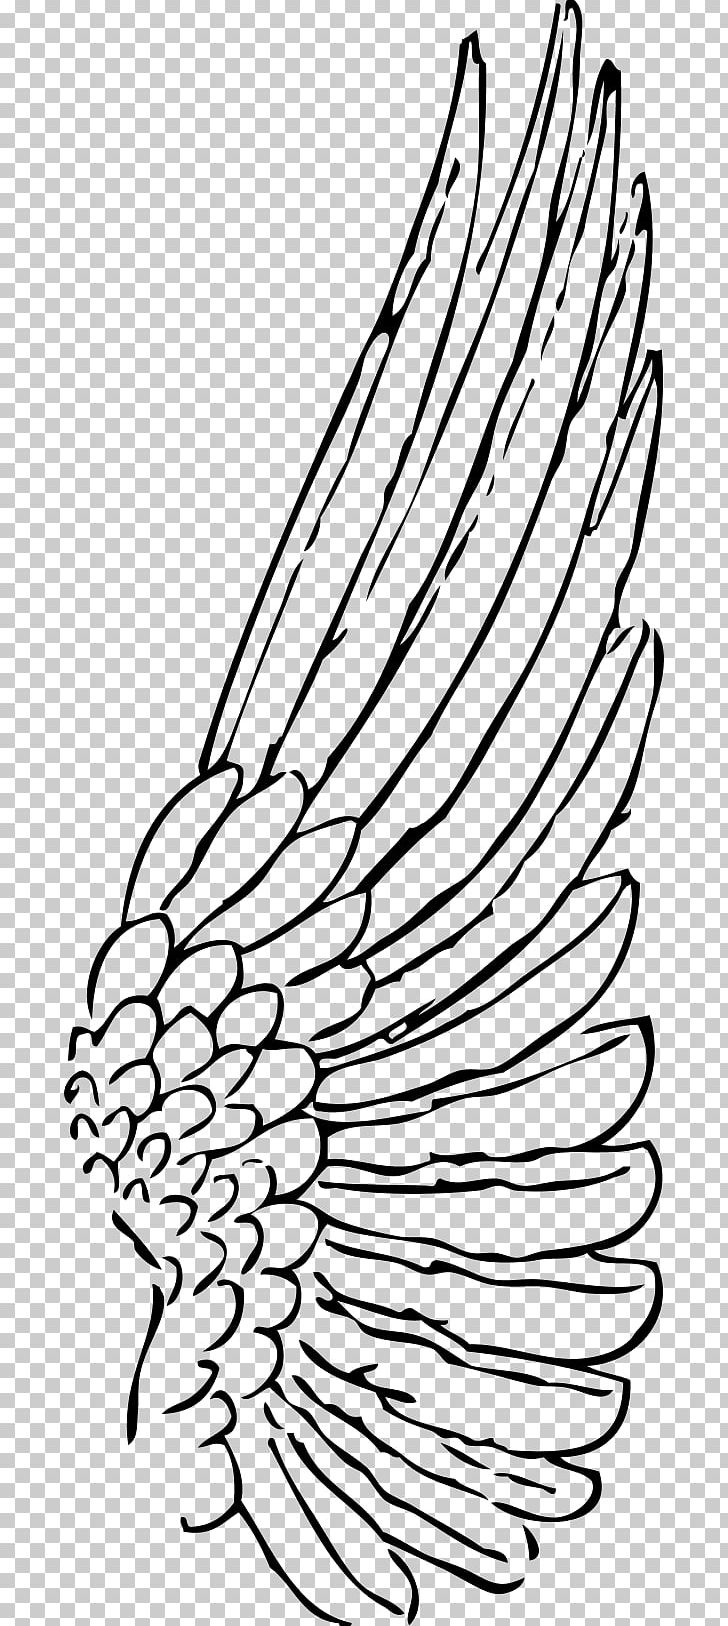 Buffalo Wing Drawing PNG, Clipart, Angel Wing, Art, Beak, Black And White, Computer Icon Free PNG Download